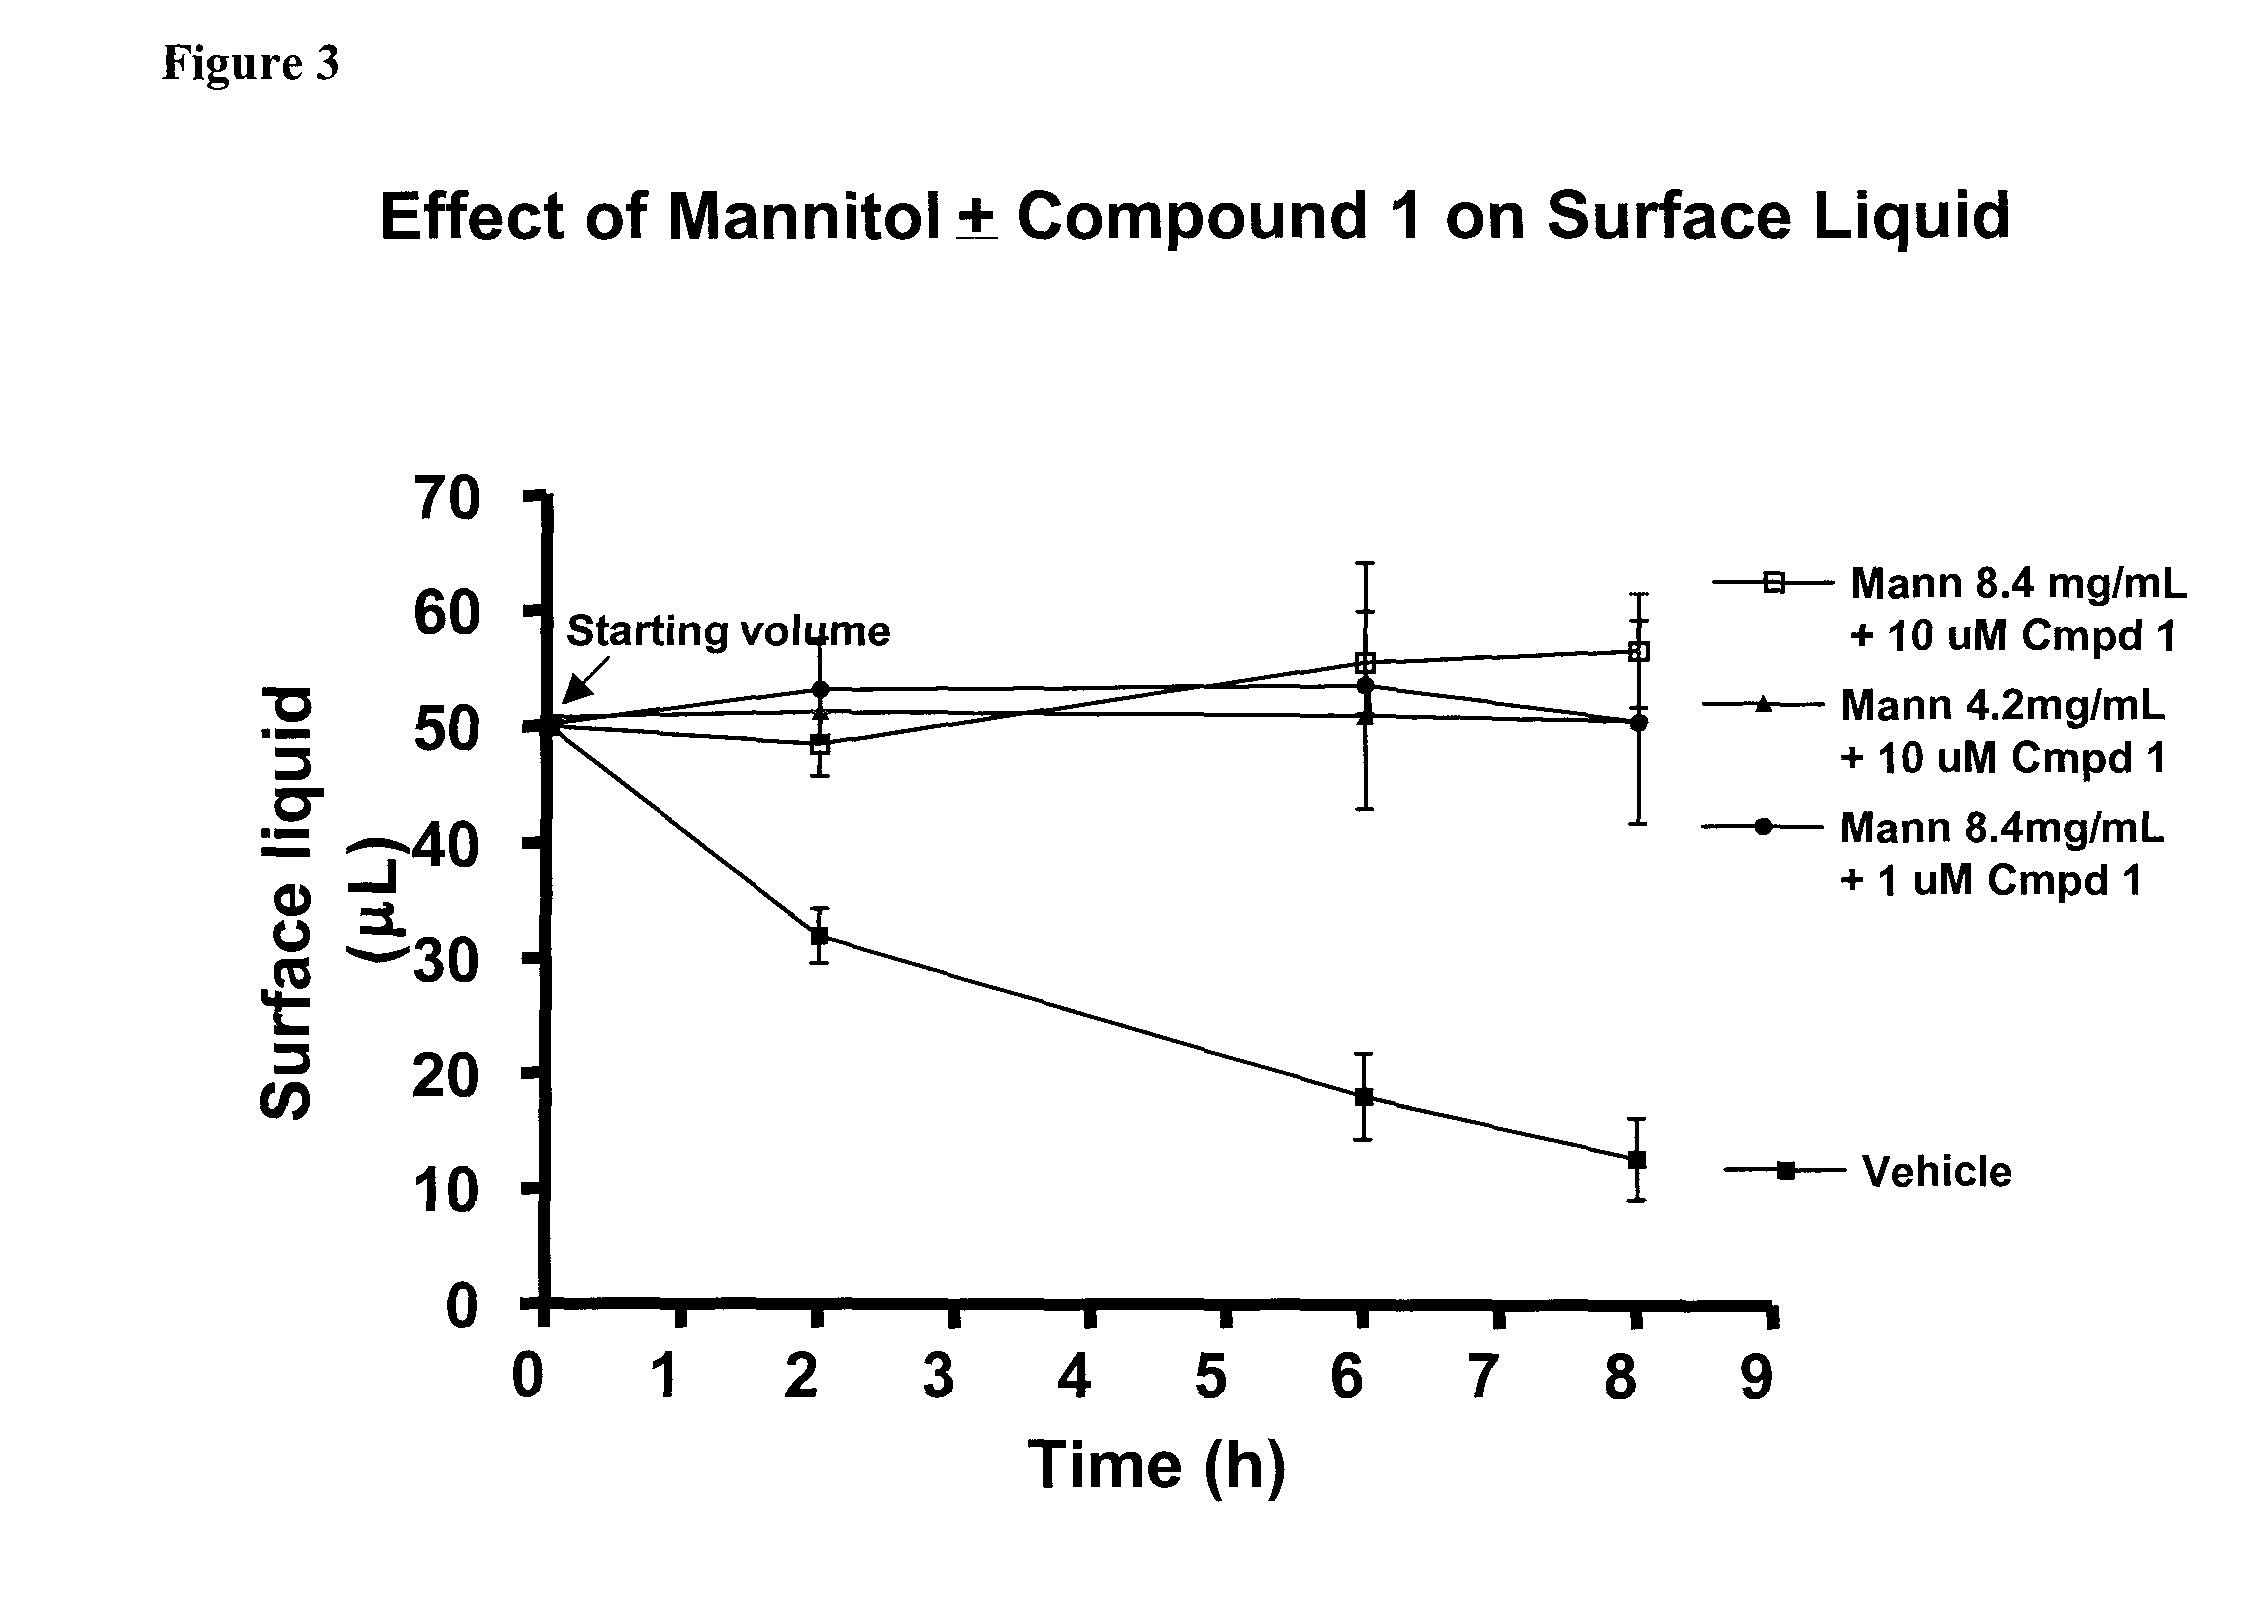 Methods of enhancing mucosal hydration and mucosal clearance by treatment with sodium channel blockers and osmolytes